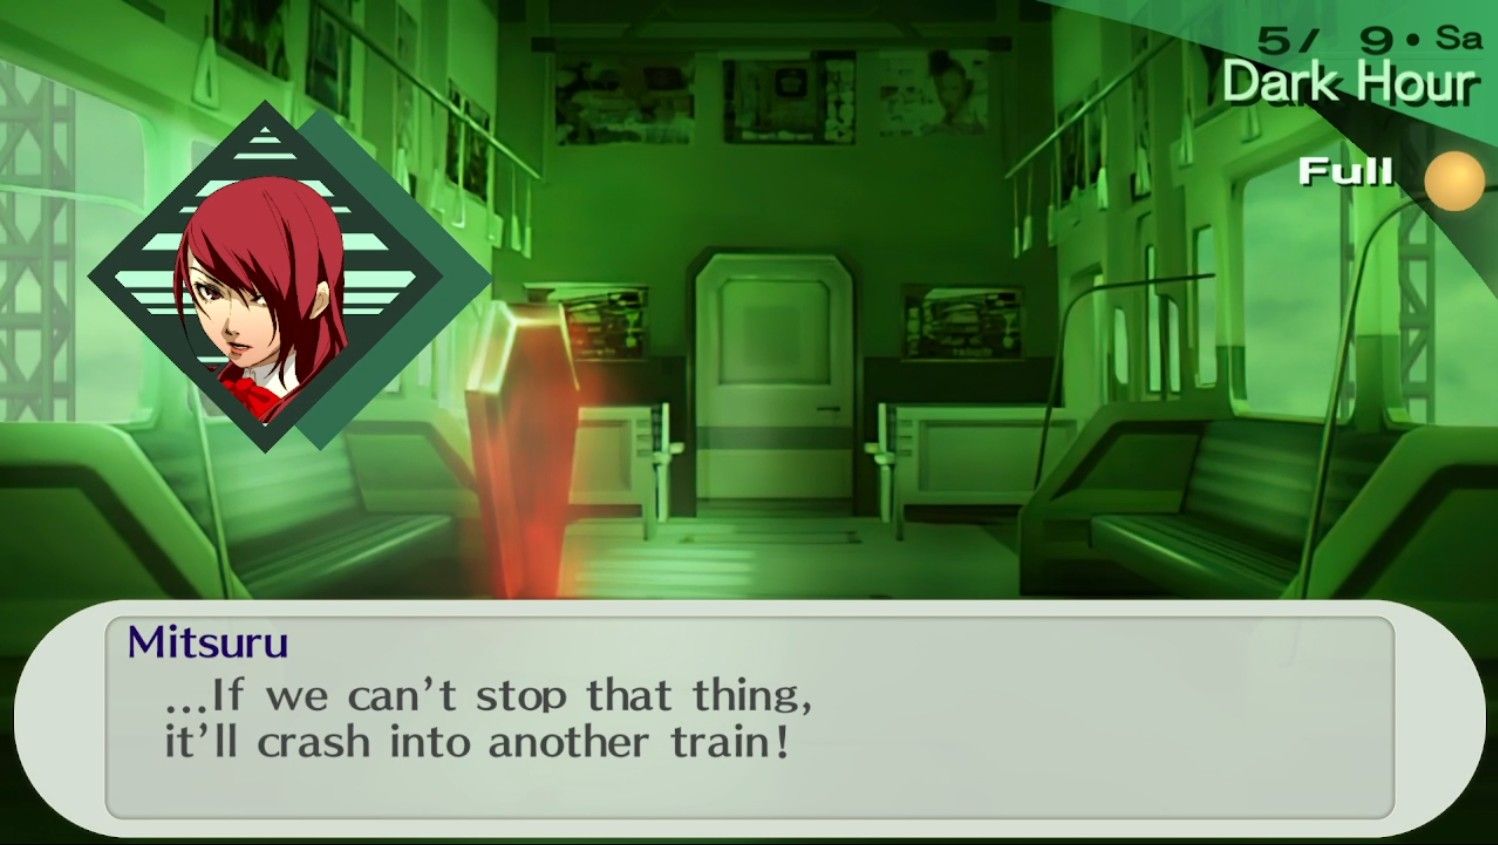 mitsuru warning the sees team to stop the monorail so it doesn't crash in persona 3 portable